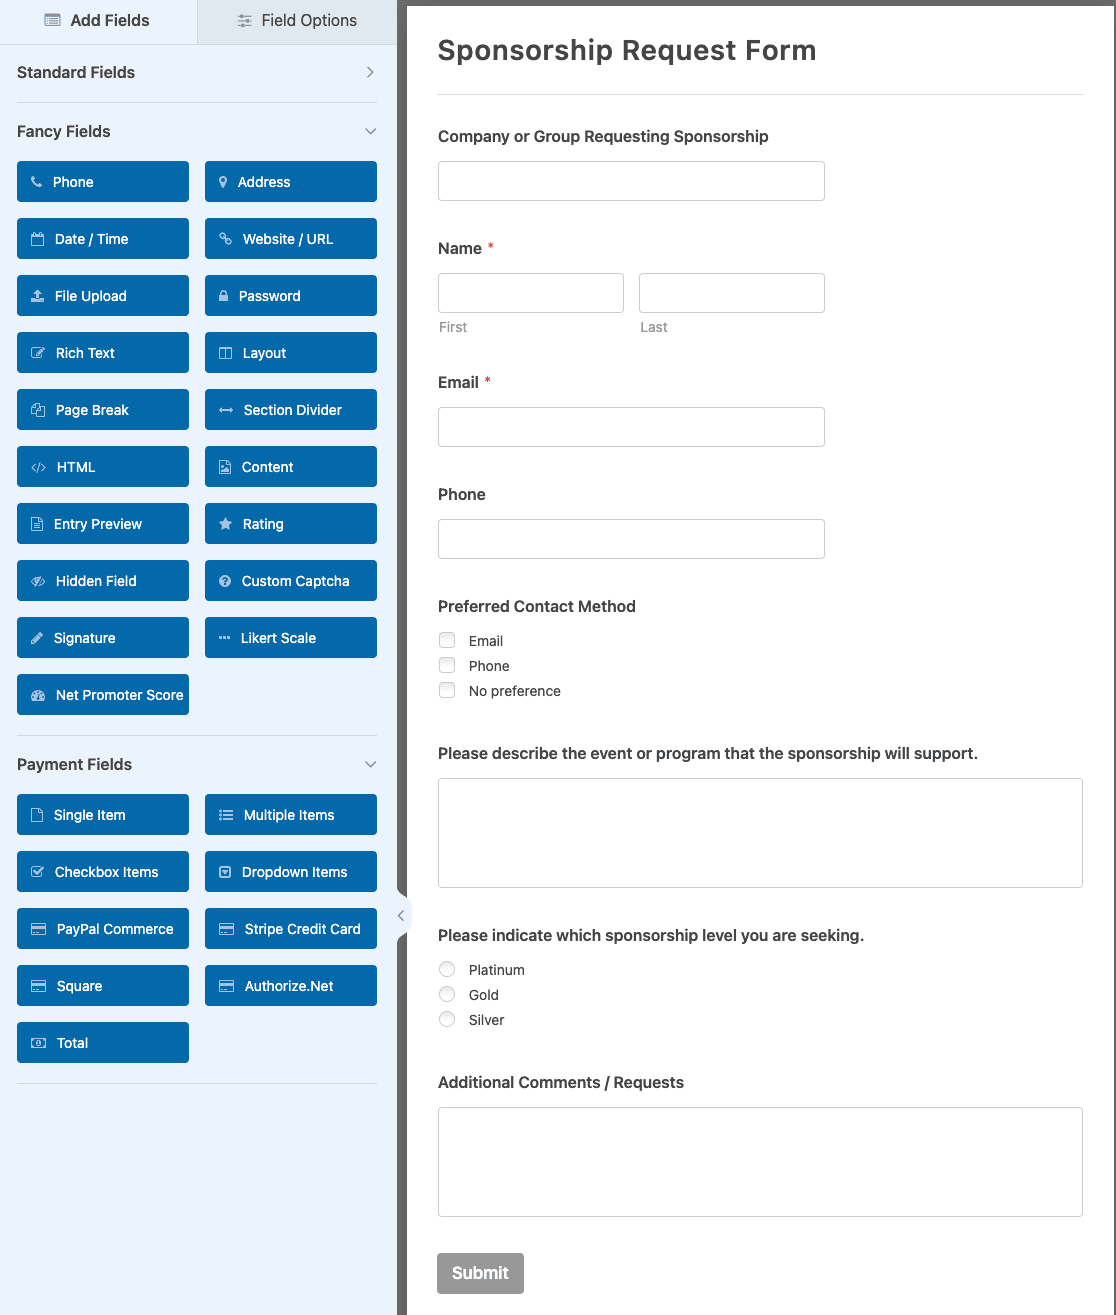 Customizing the Sponsorship Request Form template